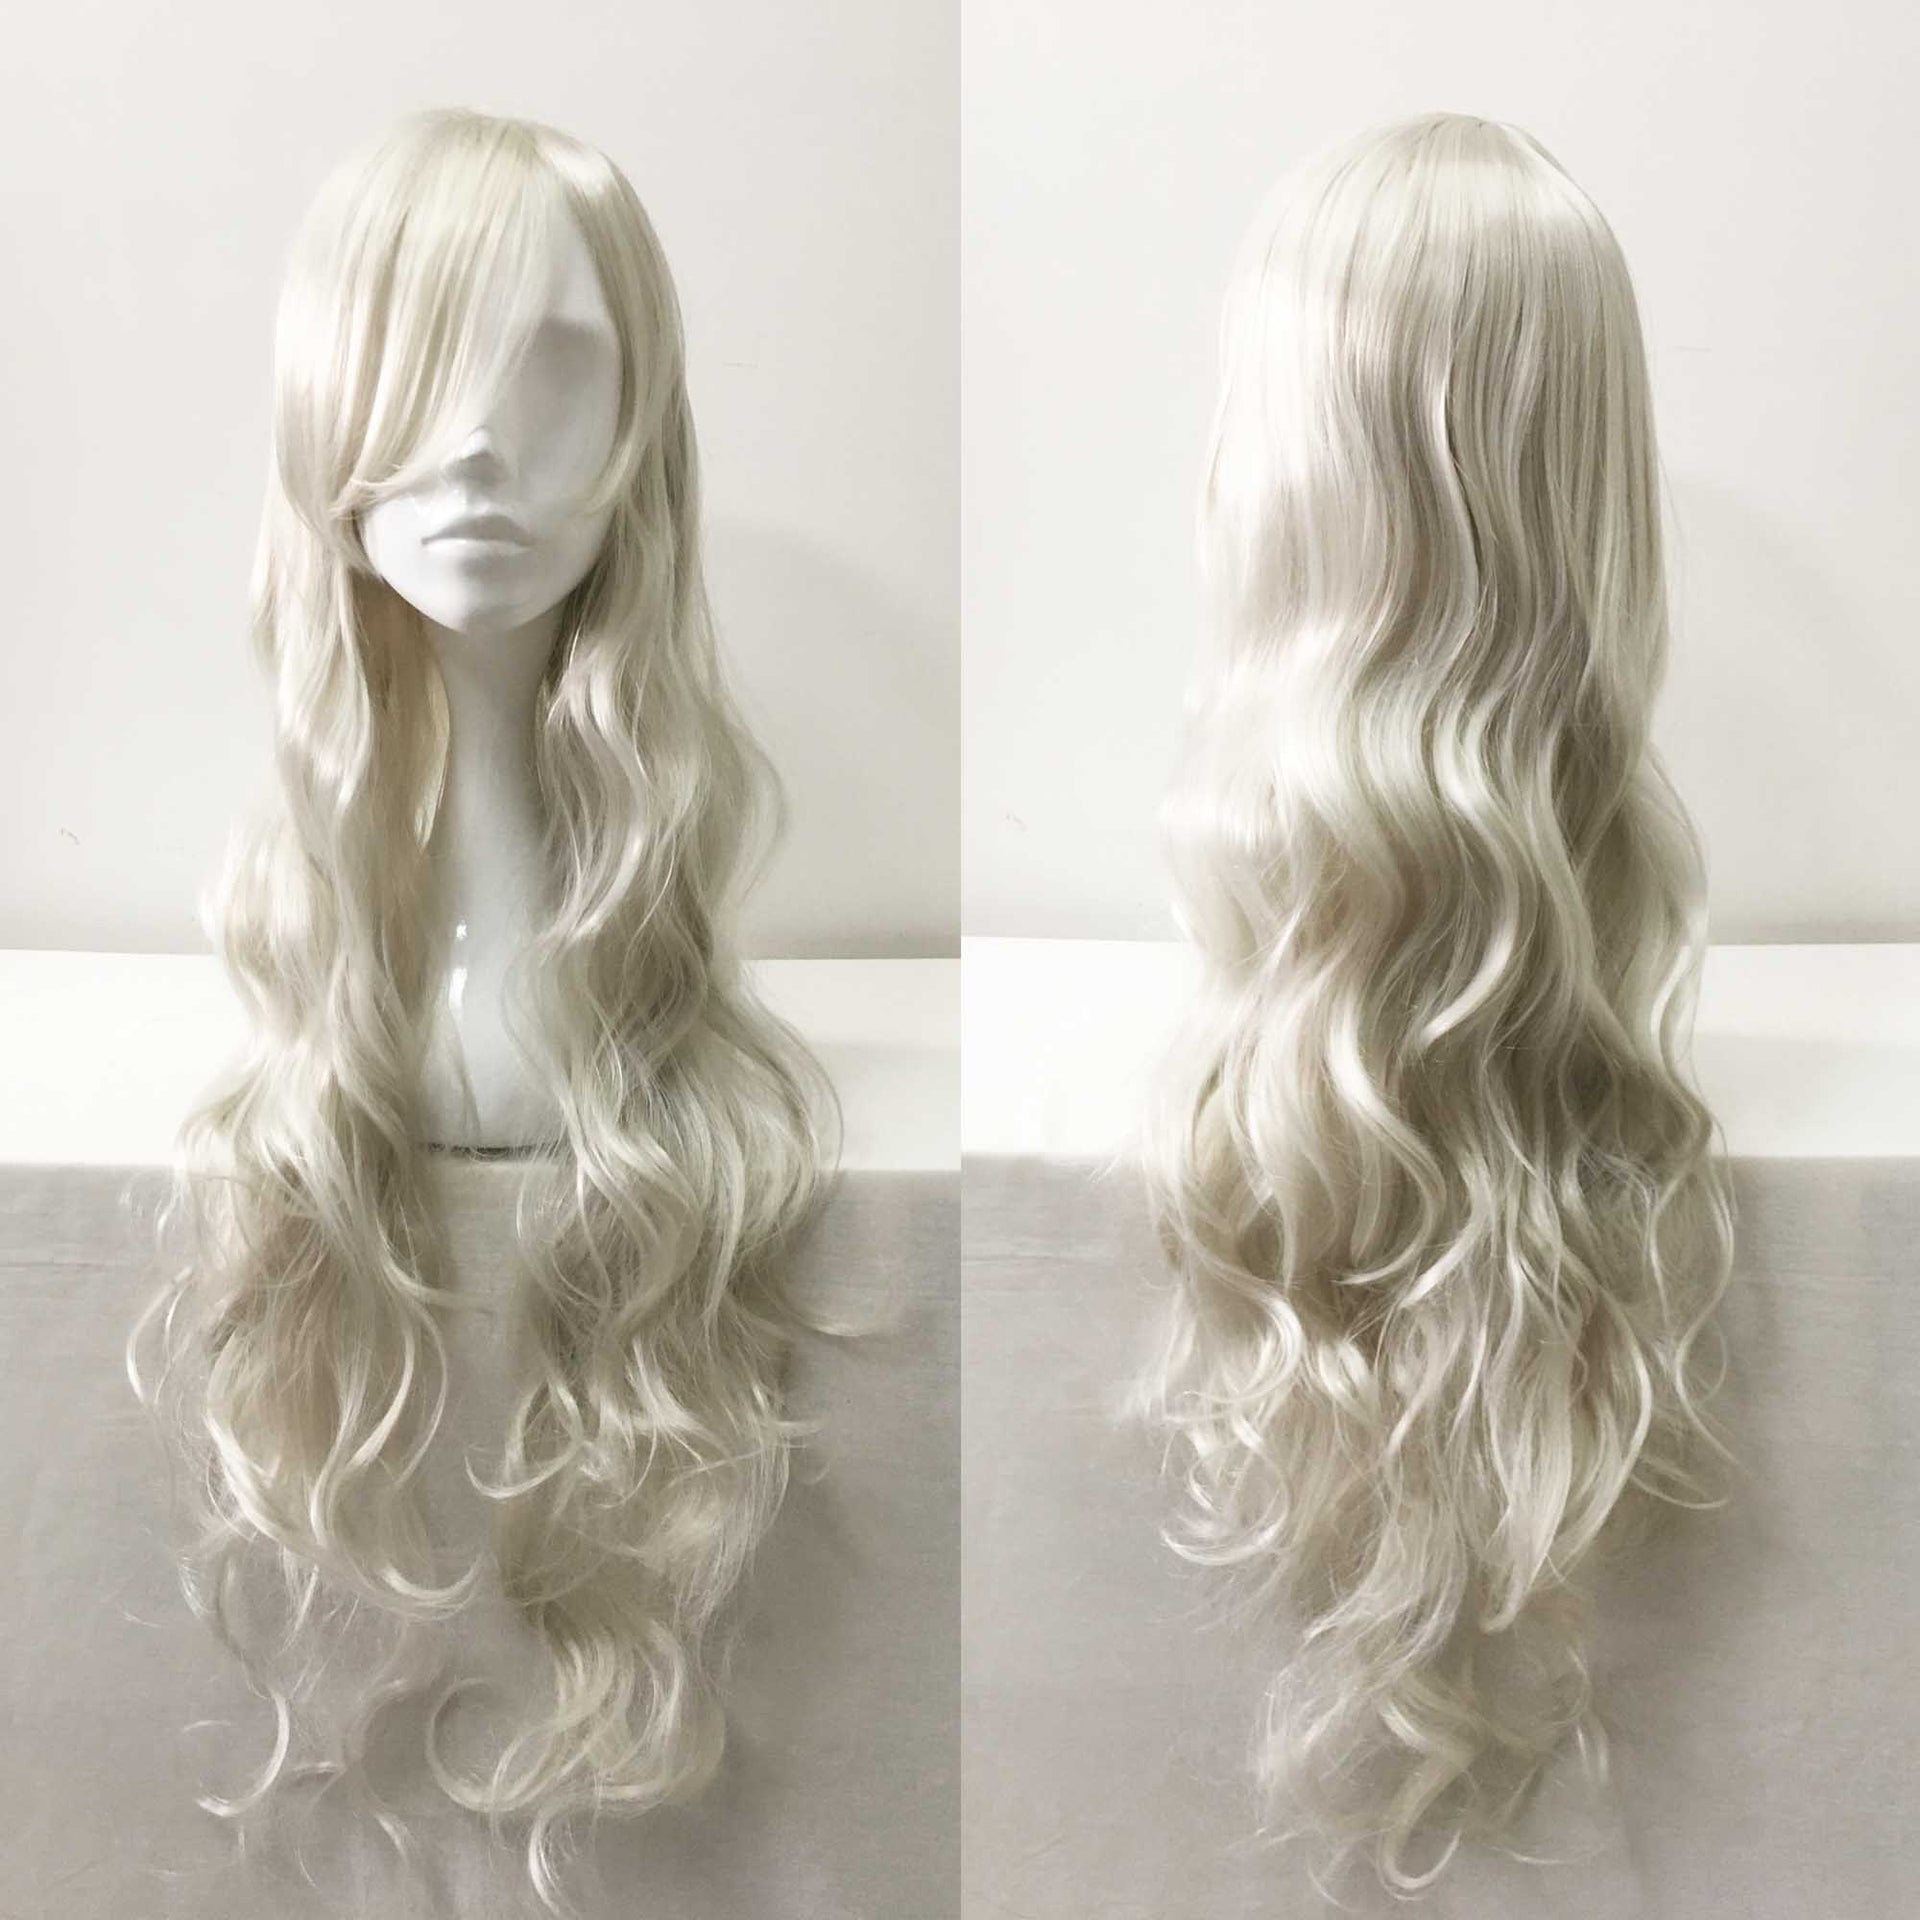 nevermindyrhead Women White Long Curly Side Swept Bangs Cosplay Wig